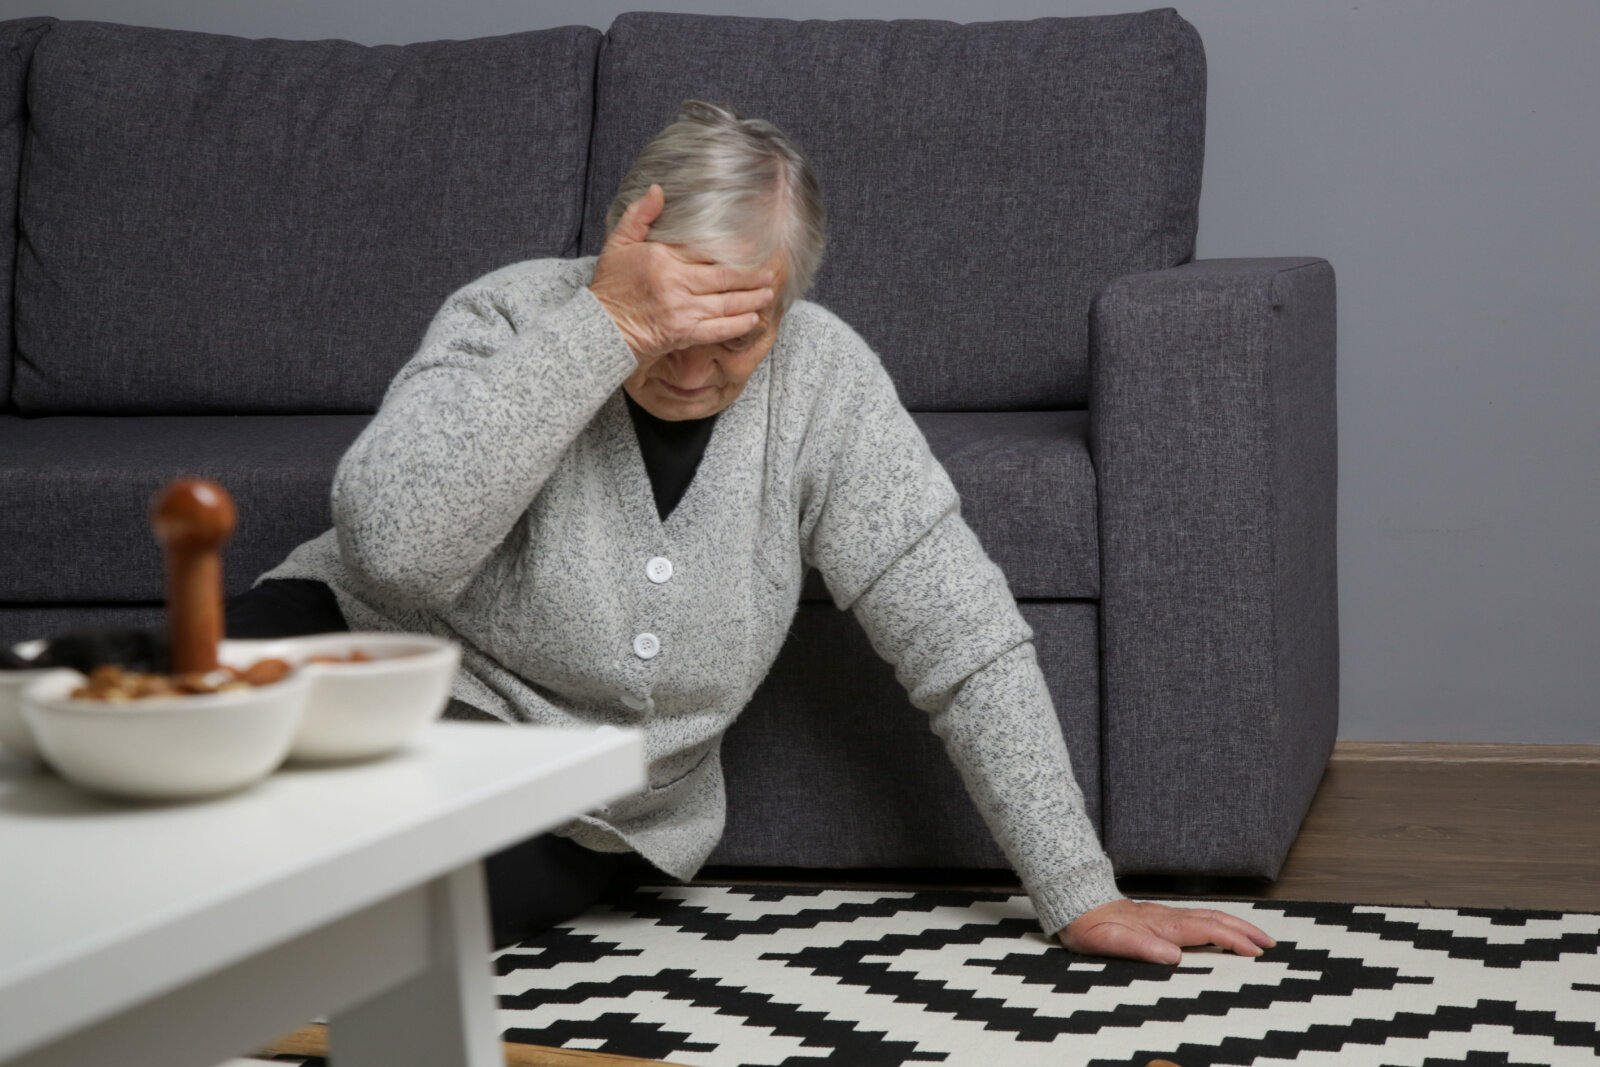 A senior woman fell on the floor after she try to stand from sitting on the couch.